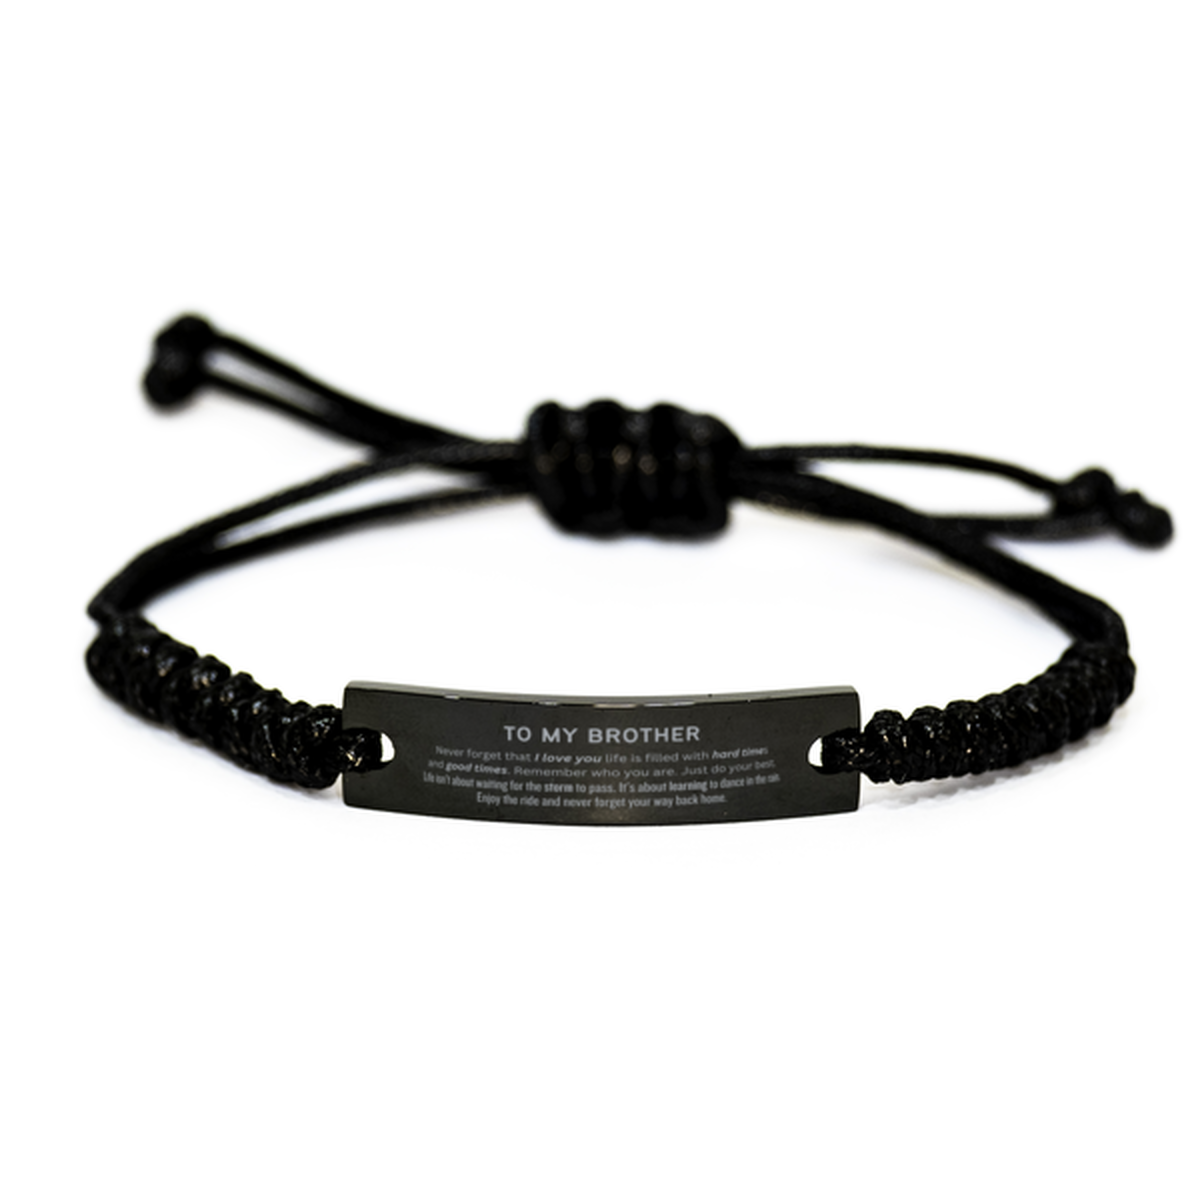 Christmas Brother Black Rope Bracelet Gifts, To My Brother Birthday Thank You Gifts For Brother, Graduation Unique Gifts For Brother To My Brother Never forget that I love you life is filled with hard times and good times. Remember who you are. Just do yo